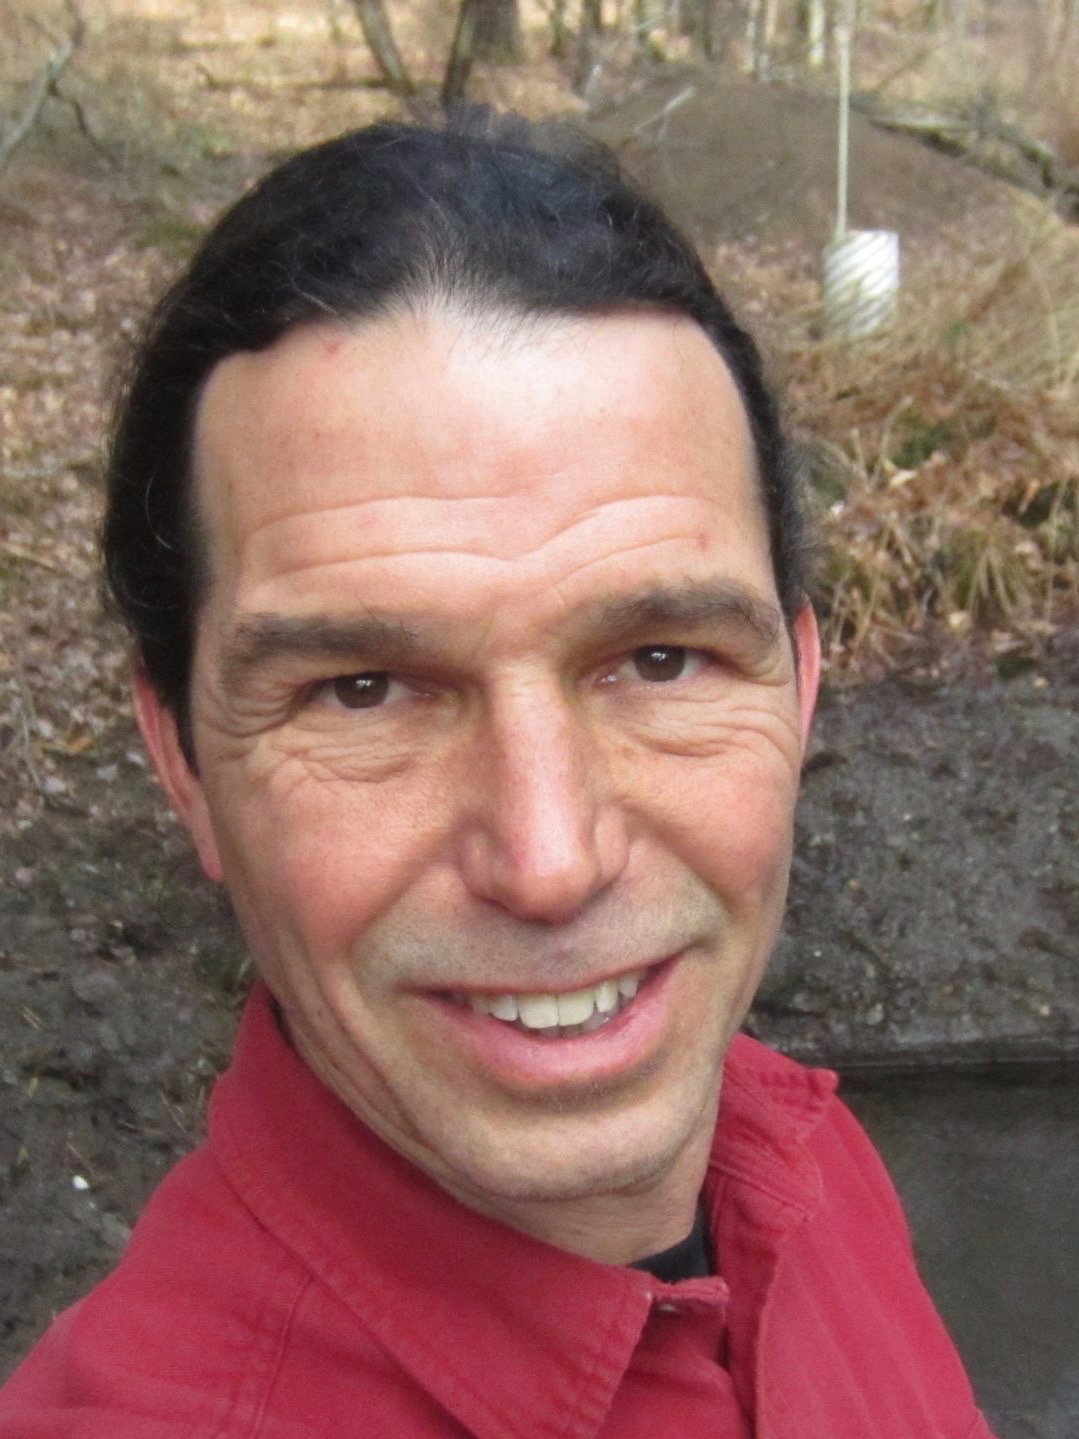 man with dark hair, ponytails and red collared shrir